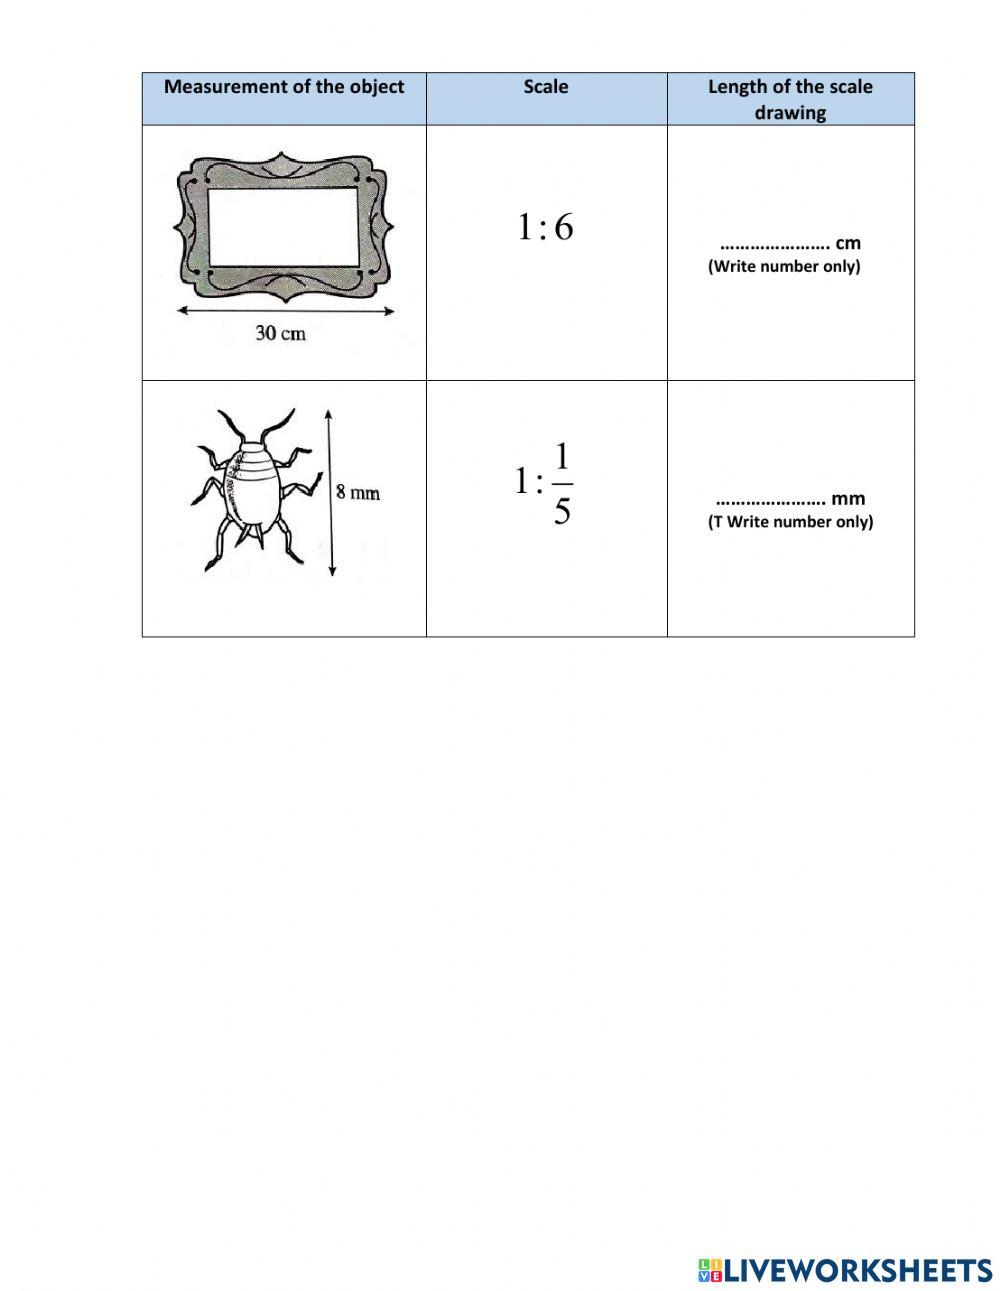 Chapter 3 scale drawings(mathematics form 3)